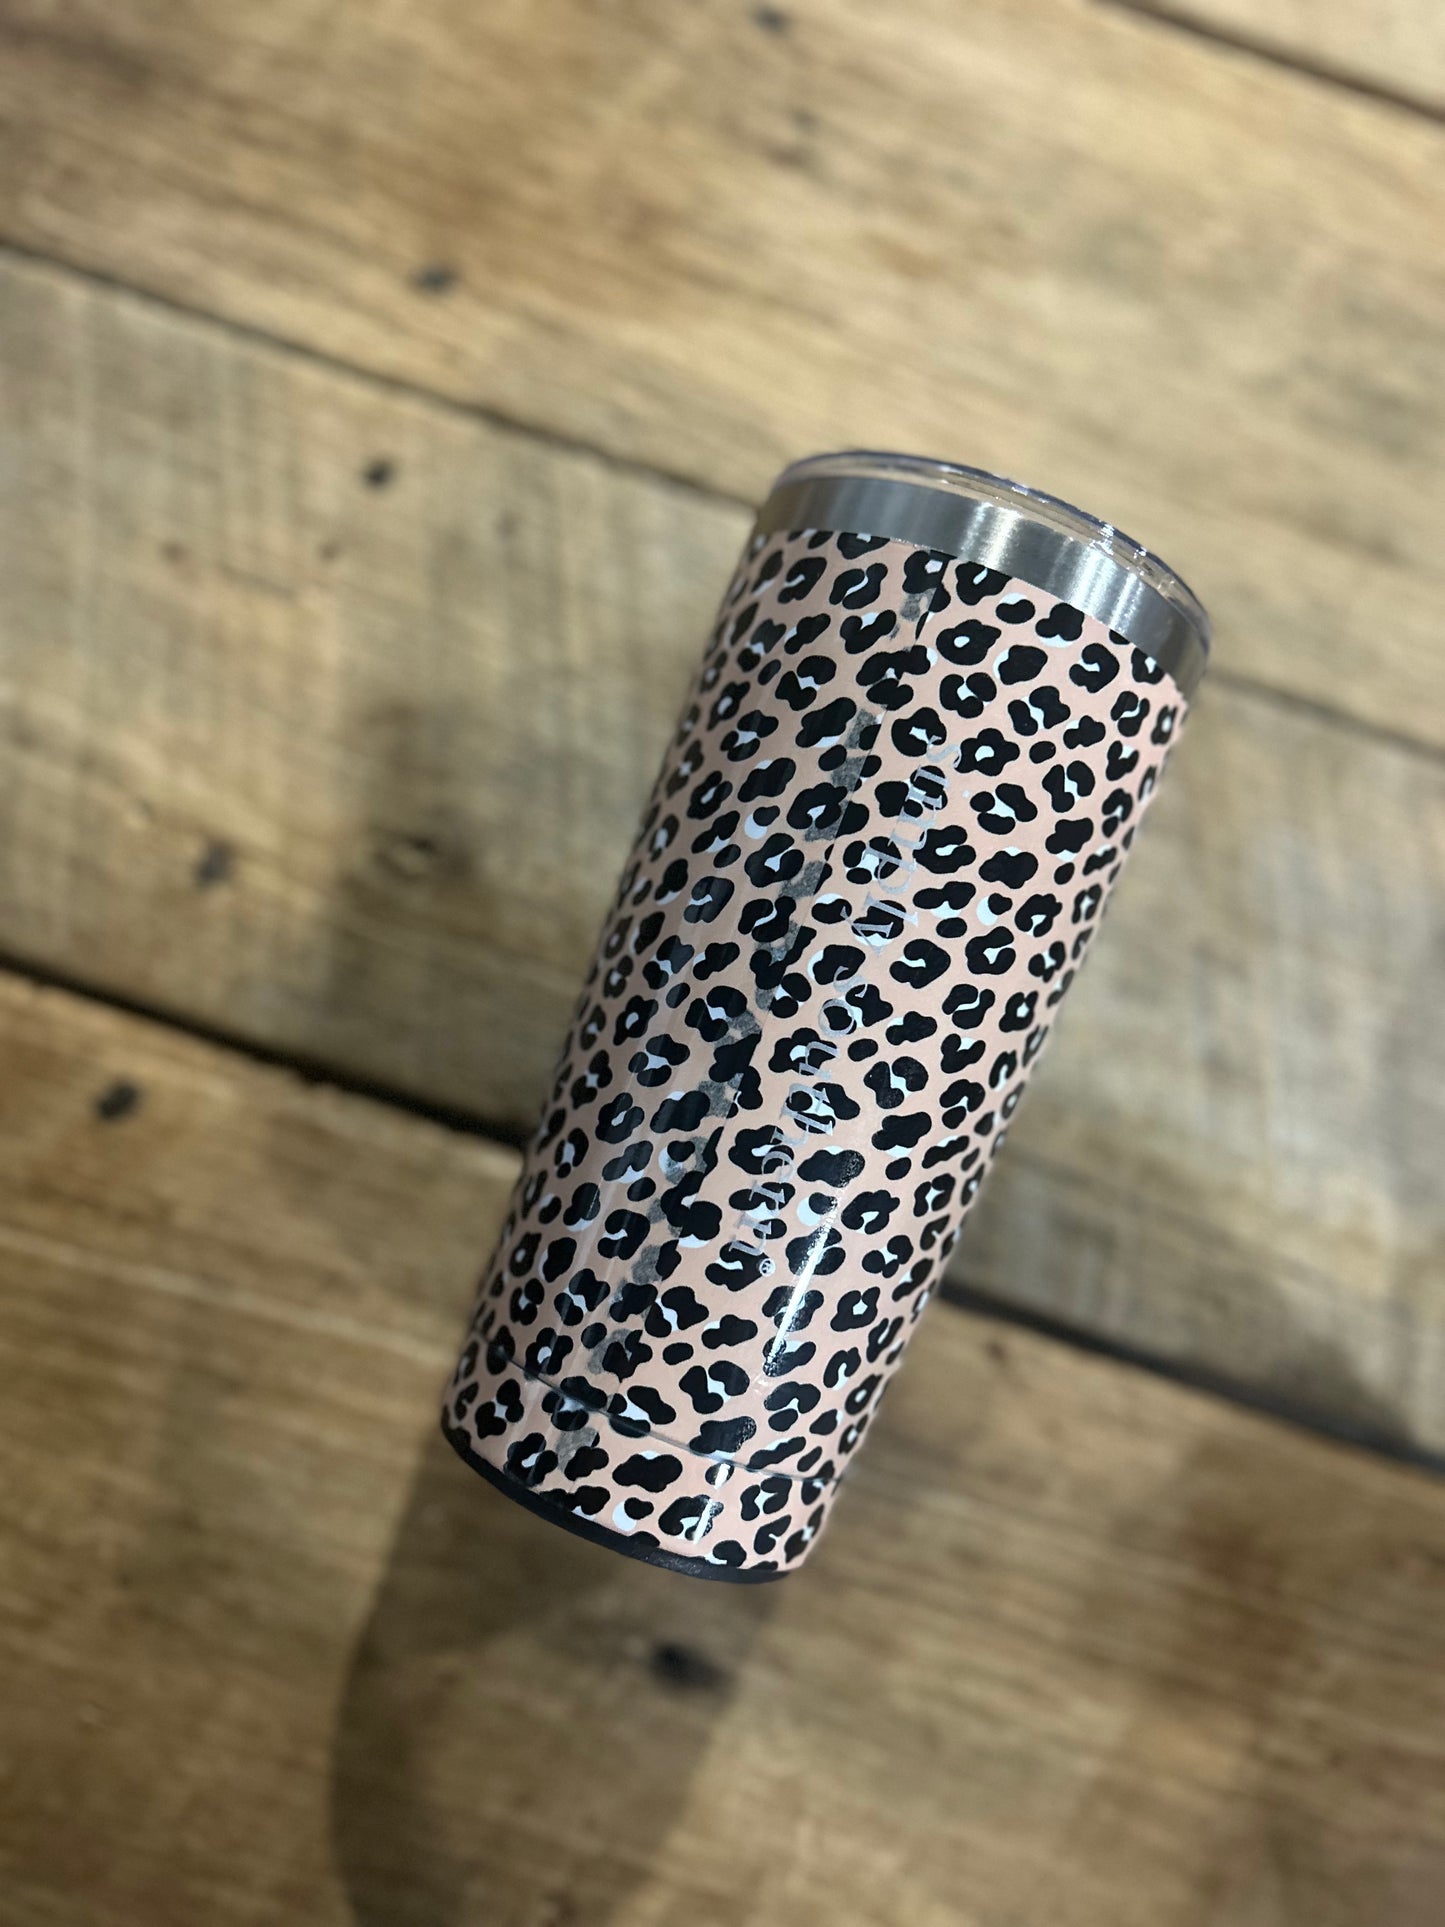 Simply Southern Tumbler